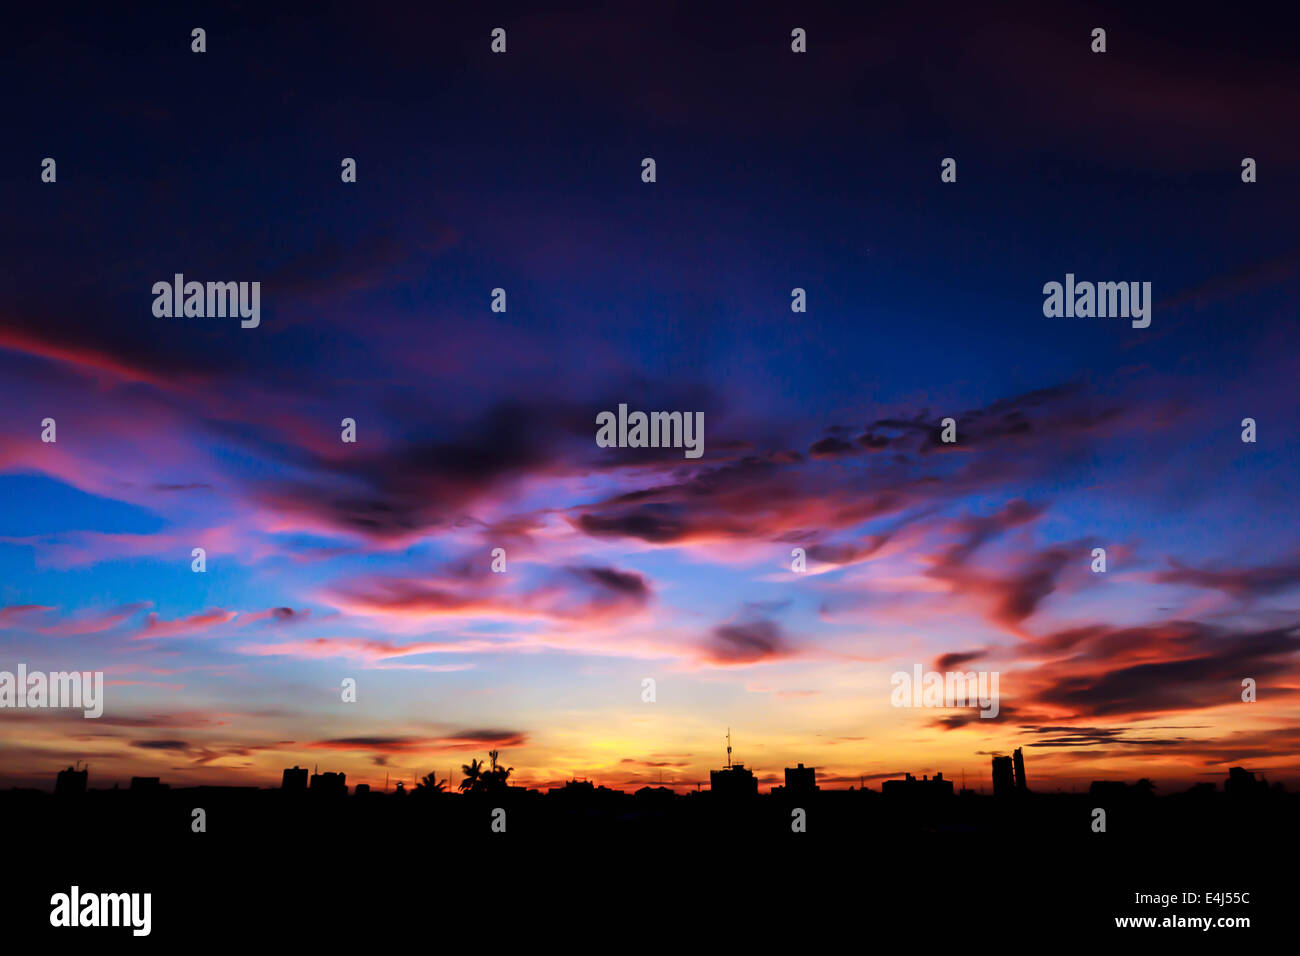 The sun sets behind a silhouetted city. Stock Photo